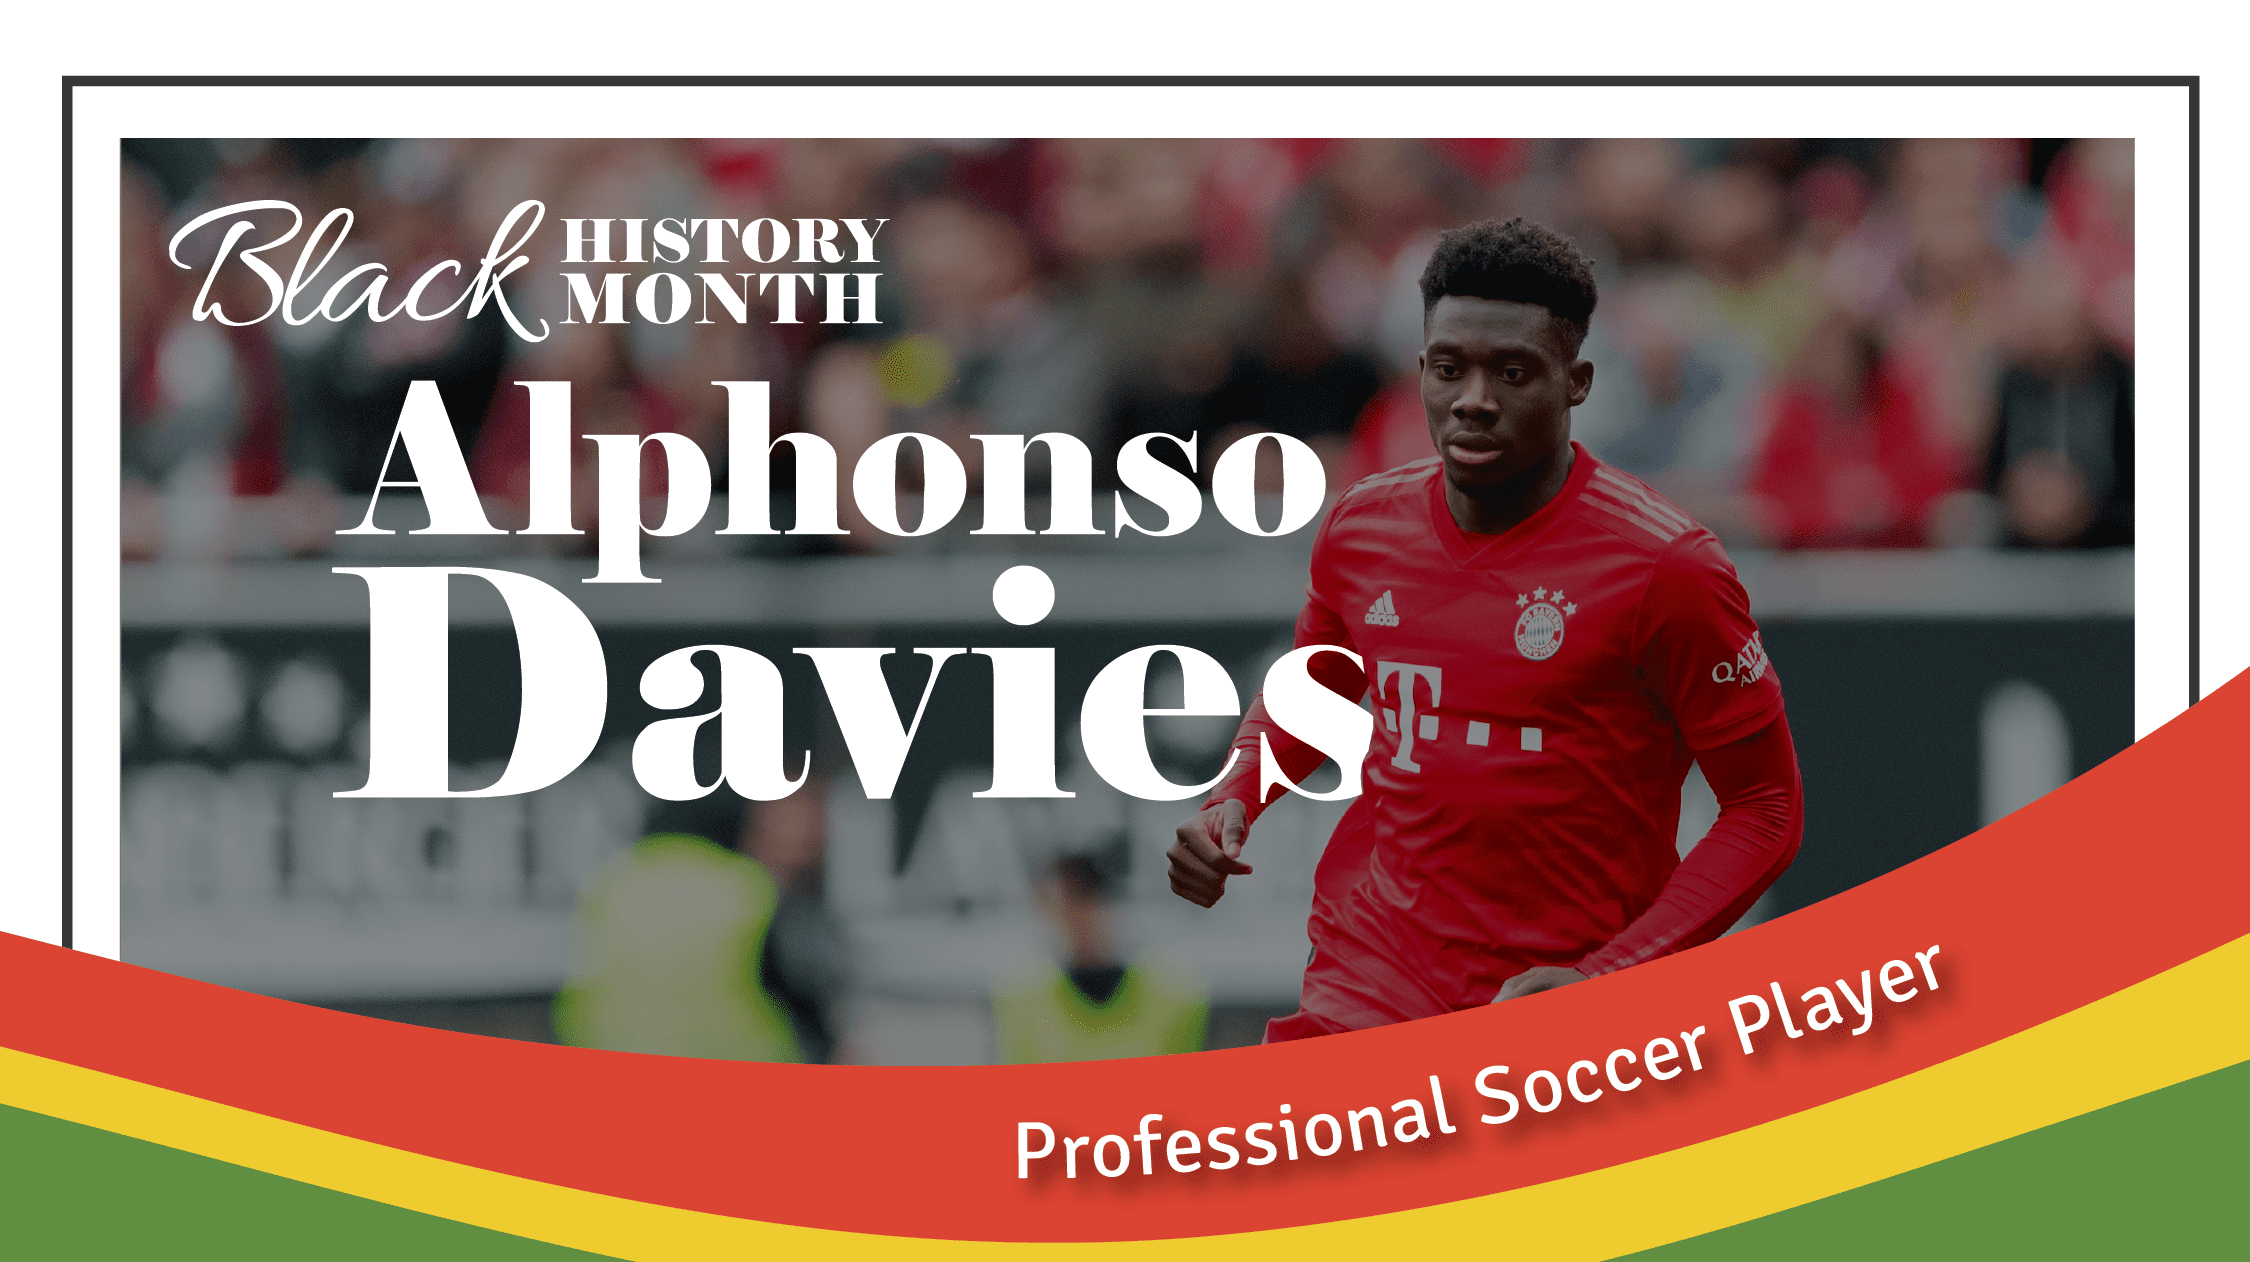 An image of Alphonso Davies with text over top "Black History Month. Alphonso Davies, Professional Soccer Player" bands of red, yellow and green flow over the bottom of the image